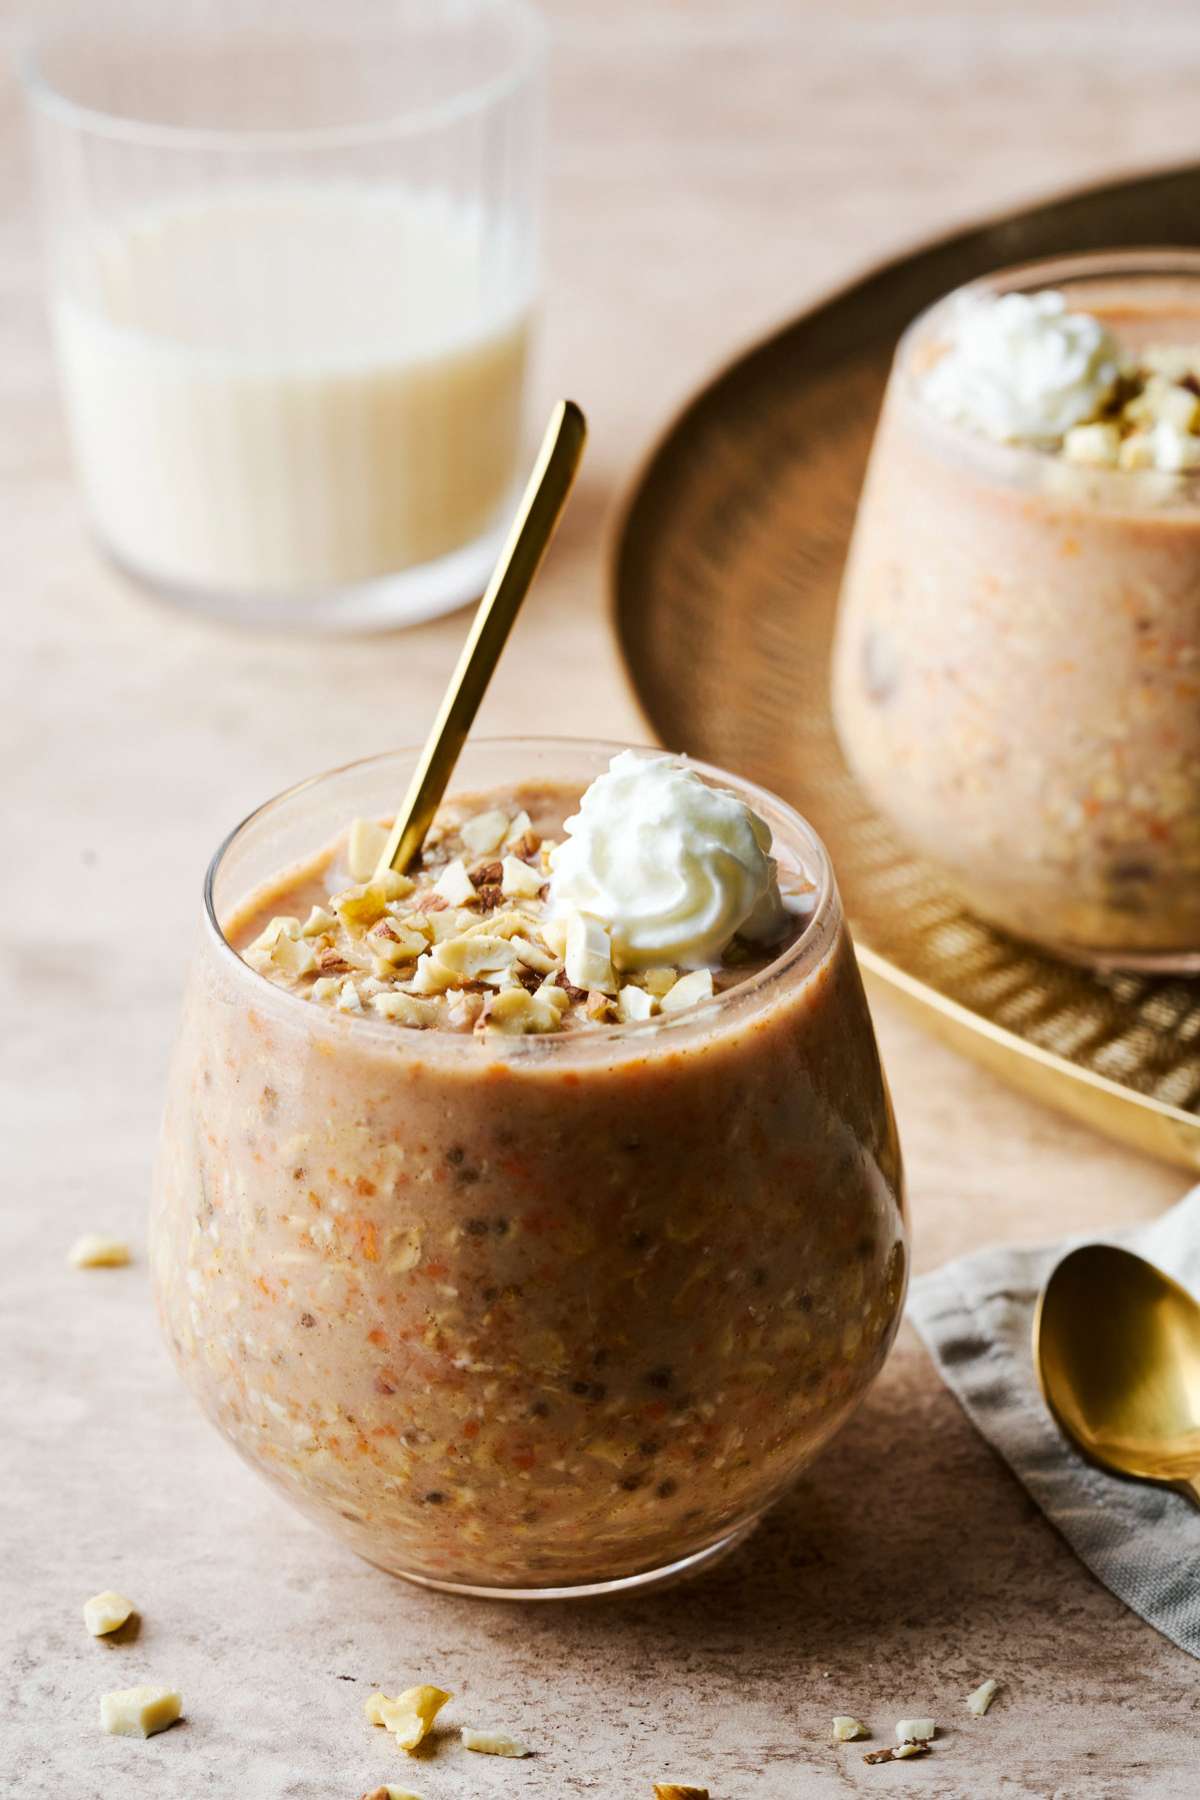 Carrot cake overnight oats topped with whipped cream near a glass of milk.